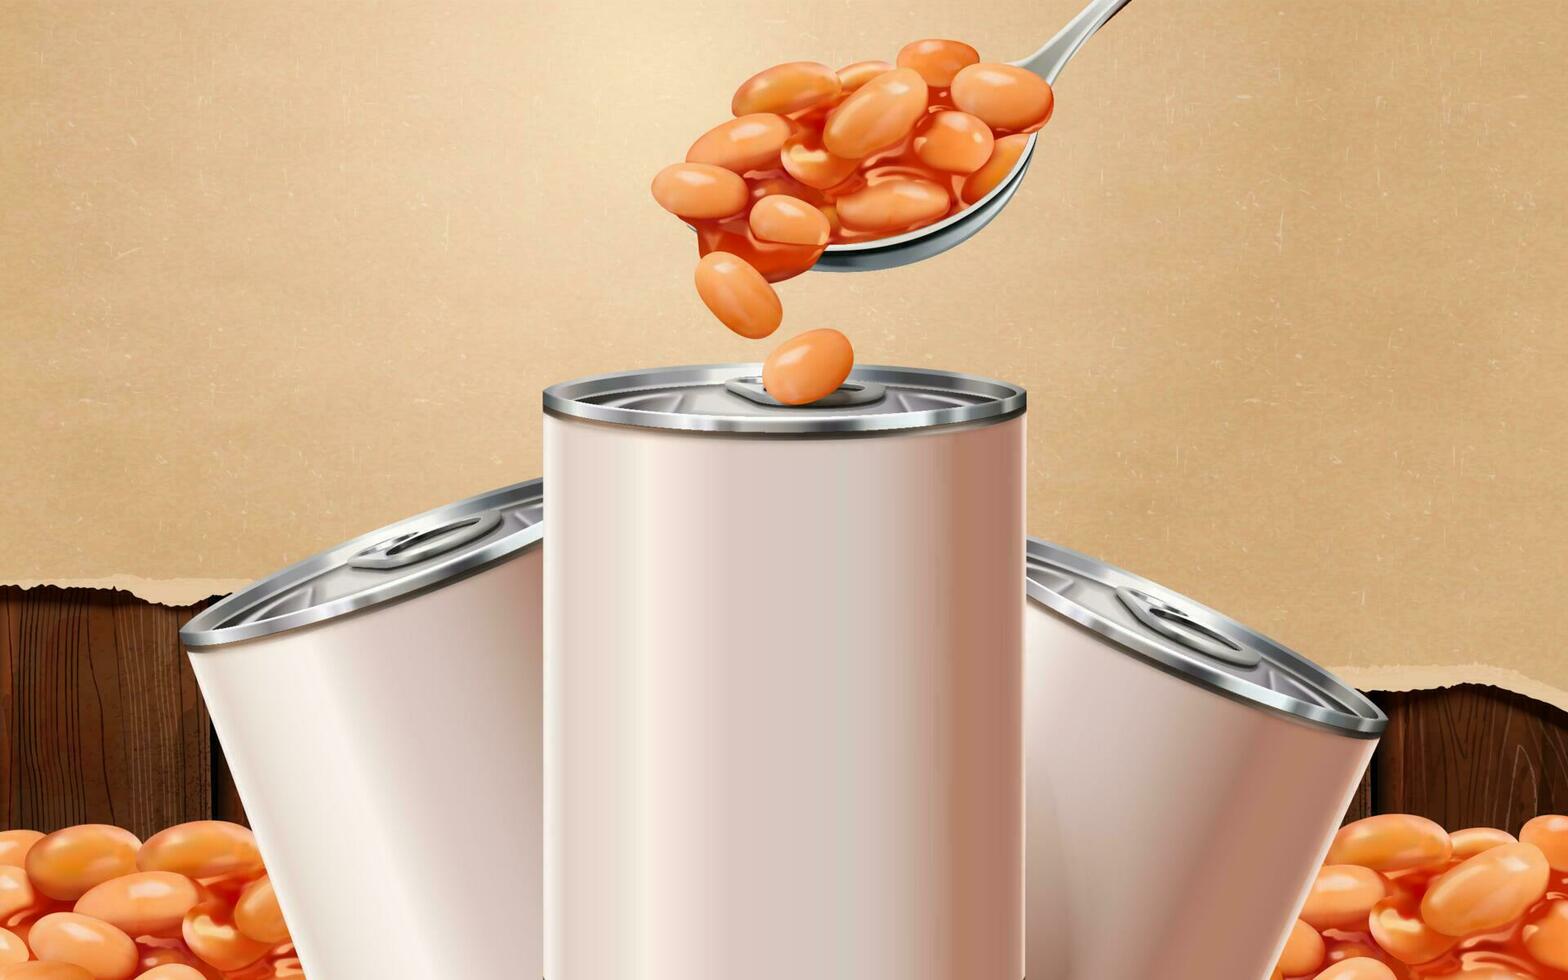 Baked beans blank tin with ingredients in 3d illustration on torn paper and wooden plate vector